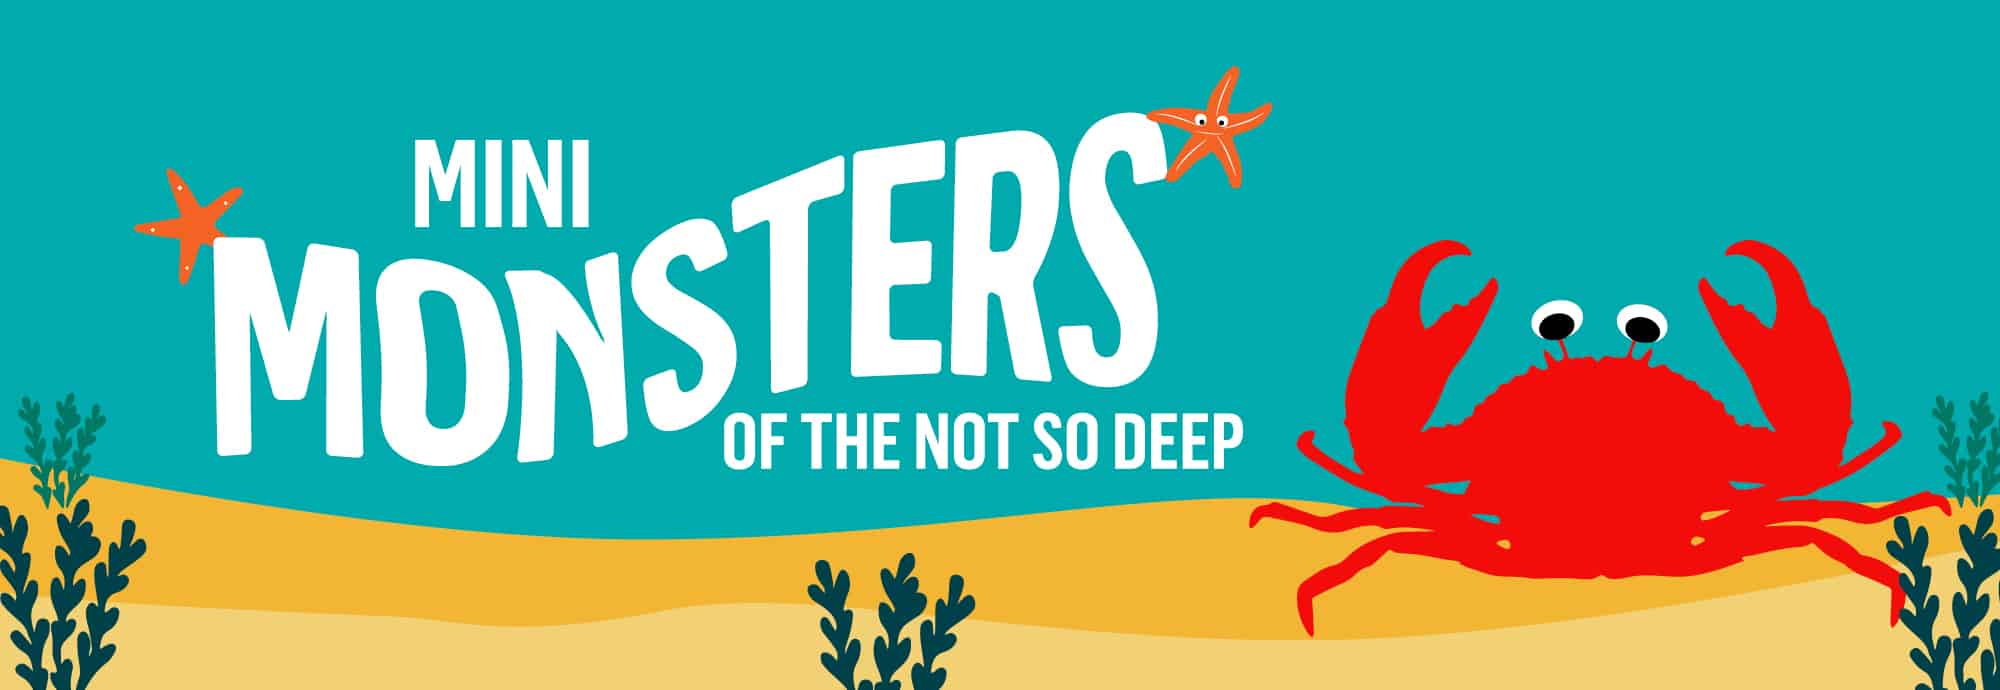 Digital artwork with white text against a blue-green background that reads 'mini monsters of the not so deep'. To the right is a bright red crab, while along the bottom is sand and some kelp.